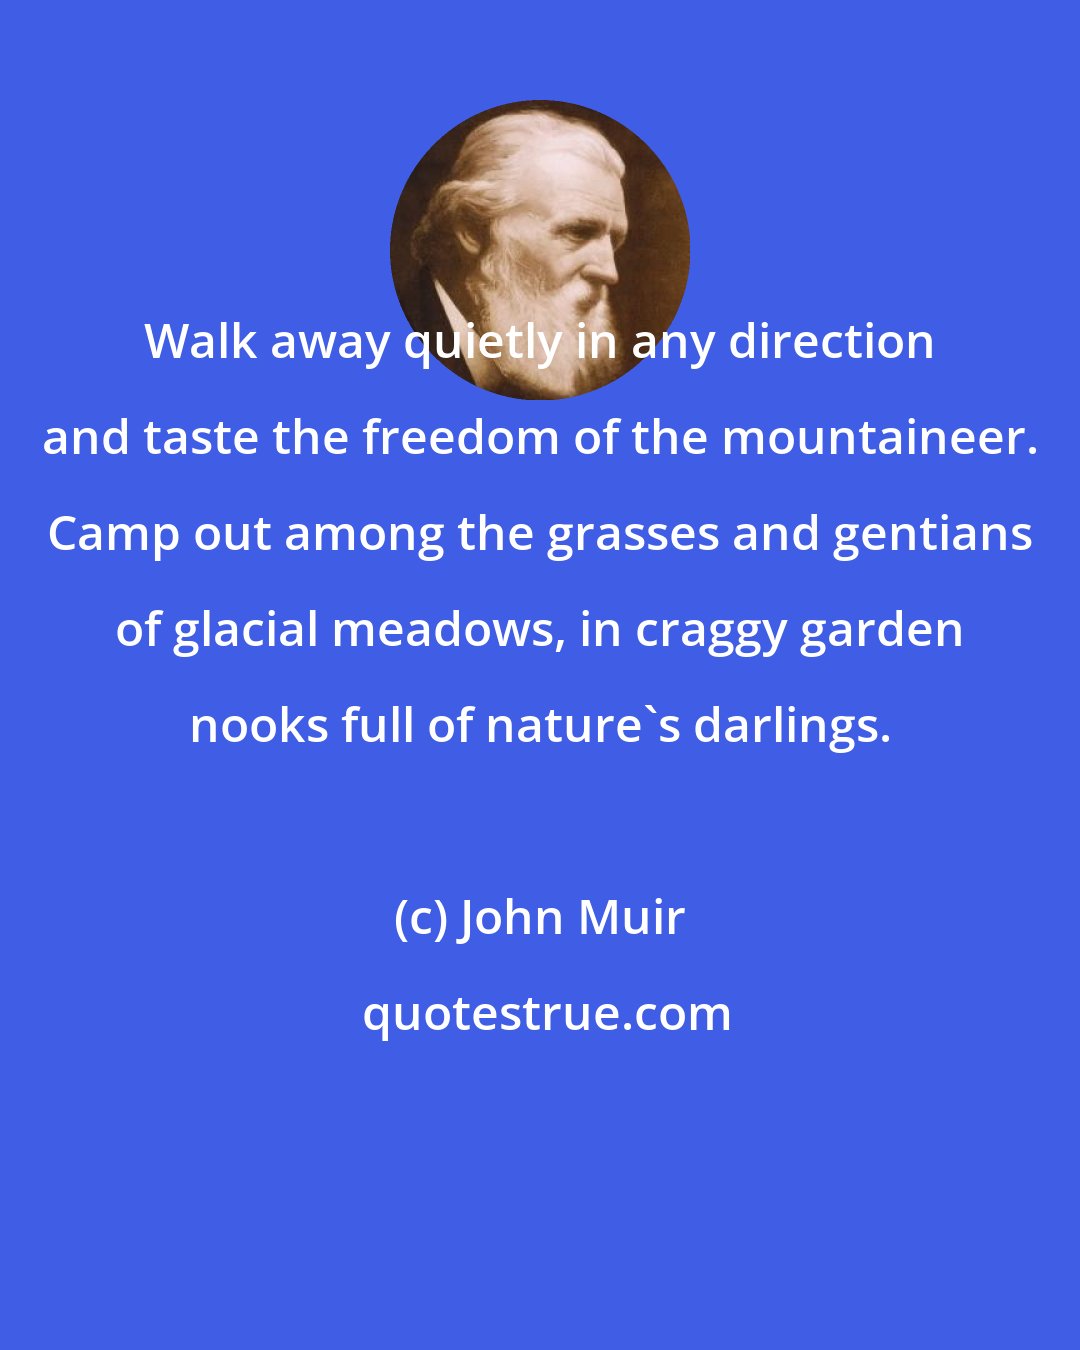 John Muir: Walk away quietly in any direction and taste the freedom of the mountaineer. Camp out among the grasses and gentians of glacial meadows, in craggy garden nooks full of nature's darlings.